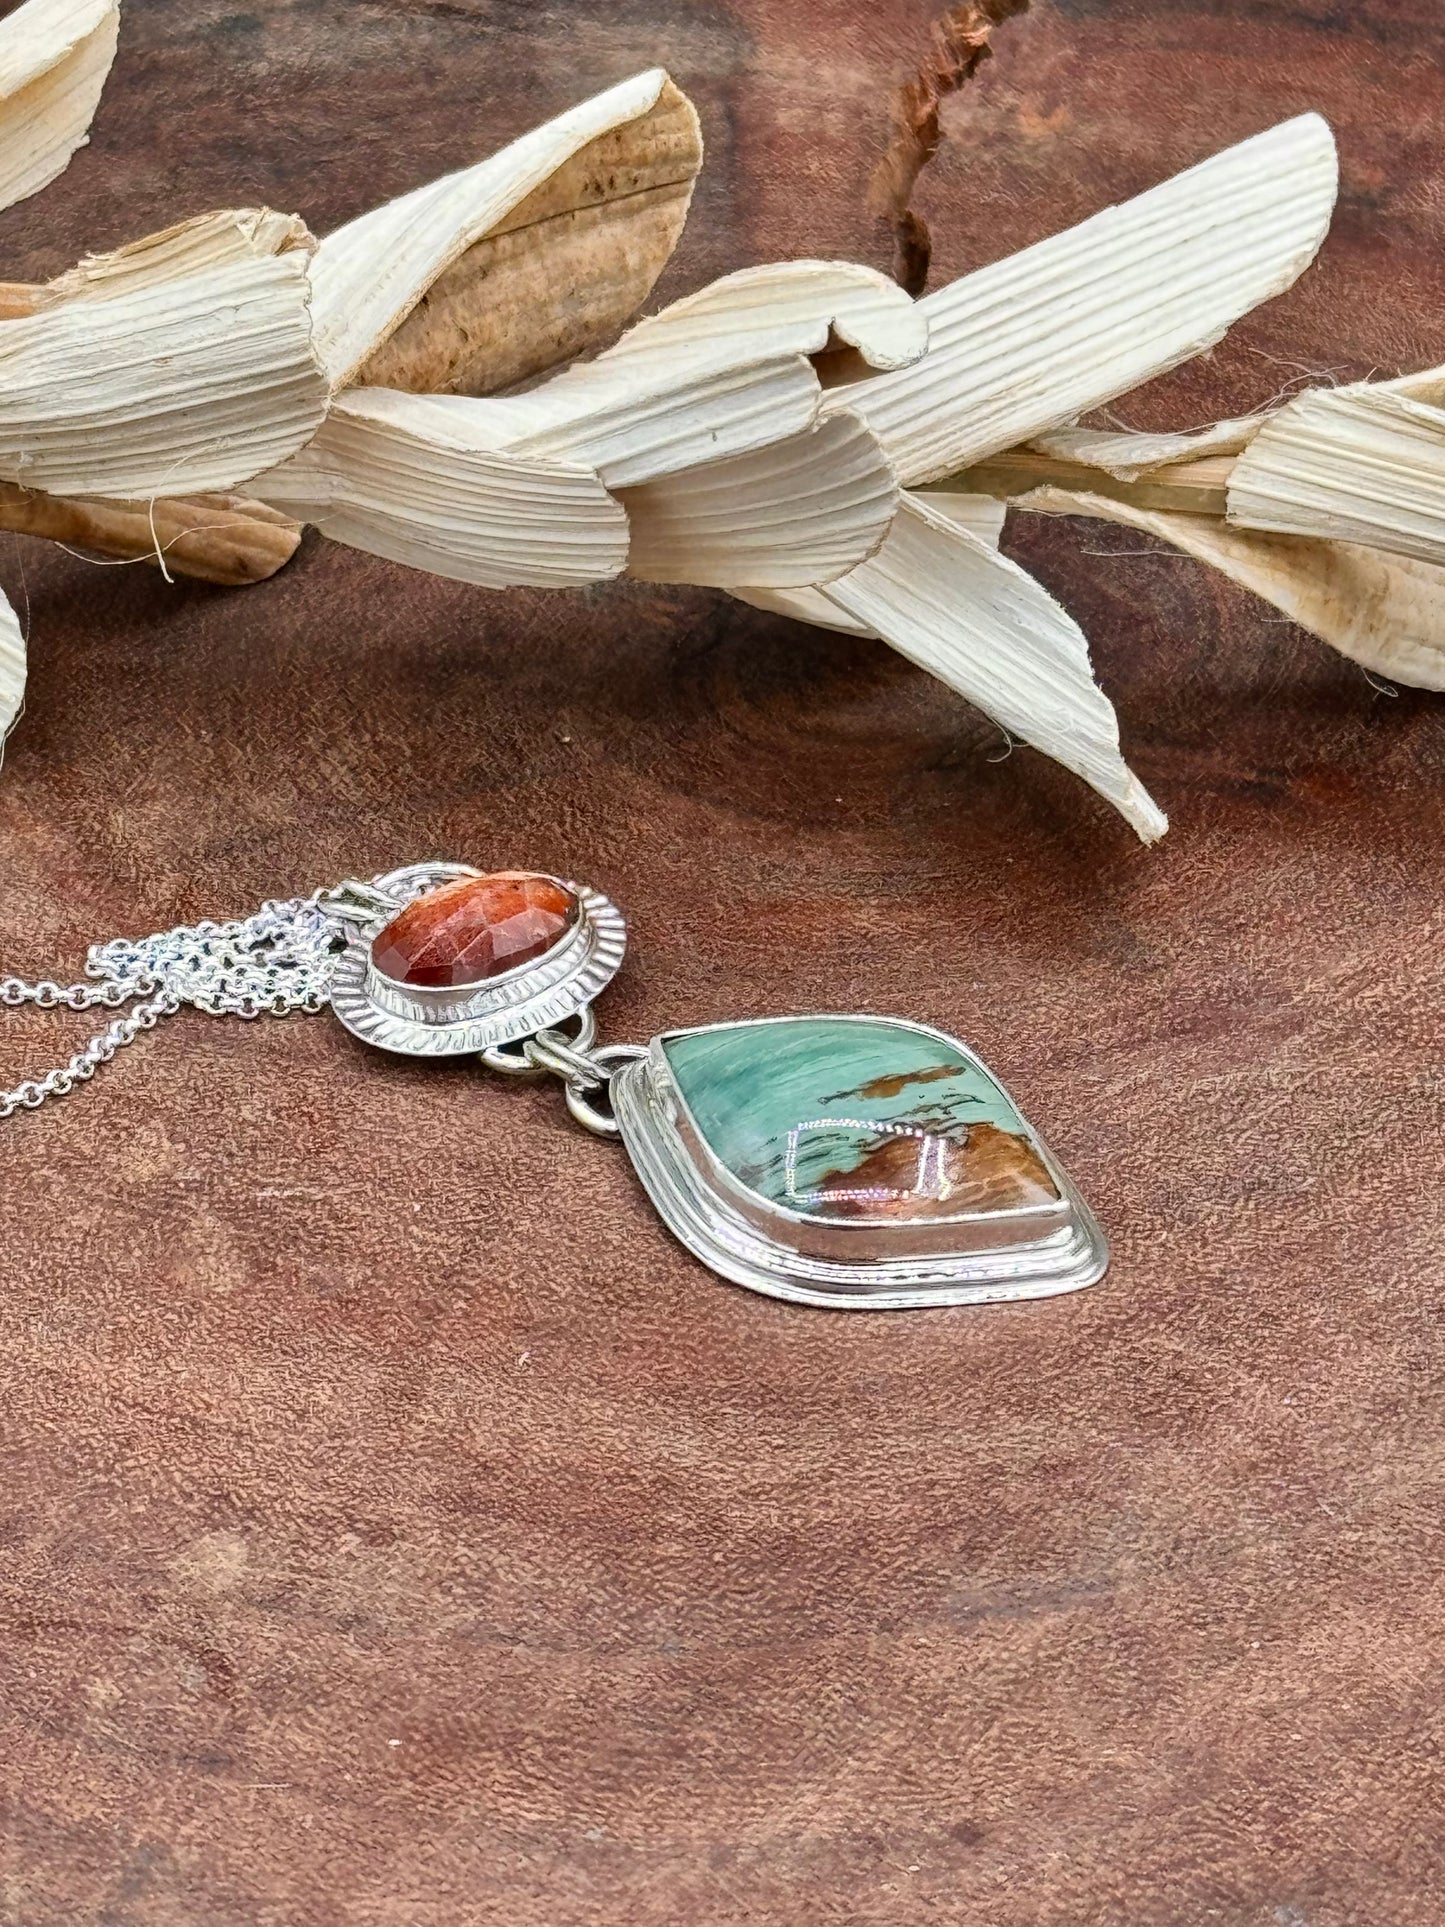 Gary Green and Madras Sunstone Sterling Silver Pendant